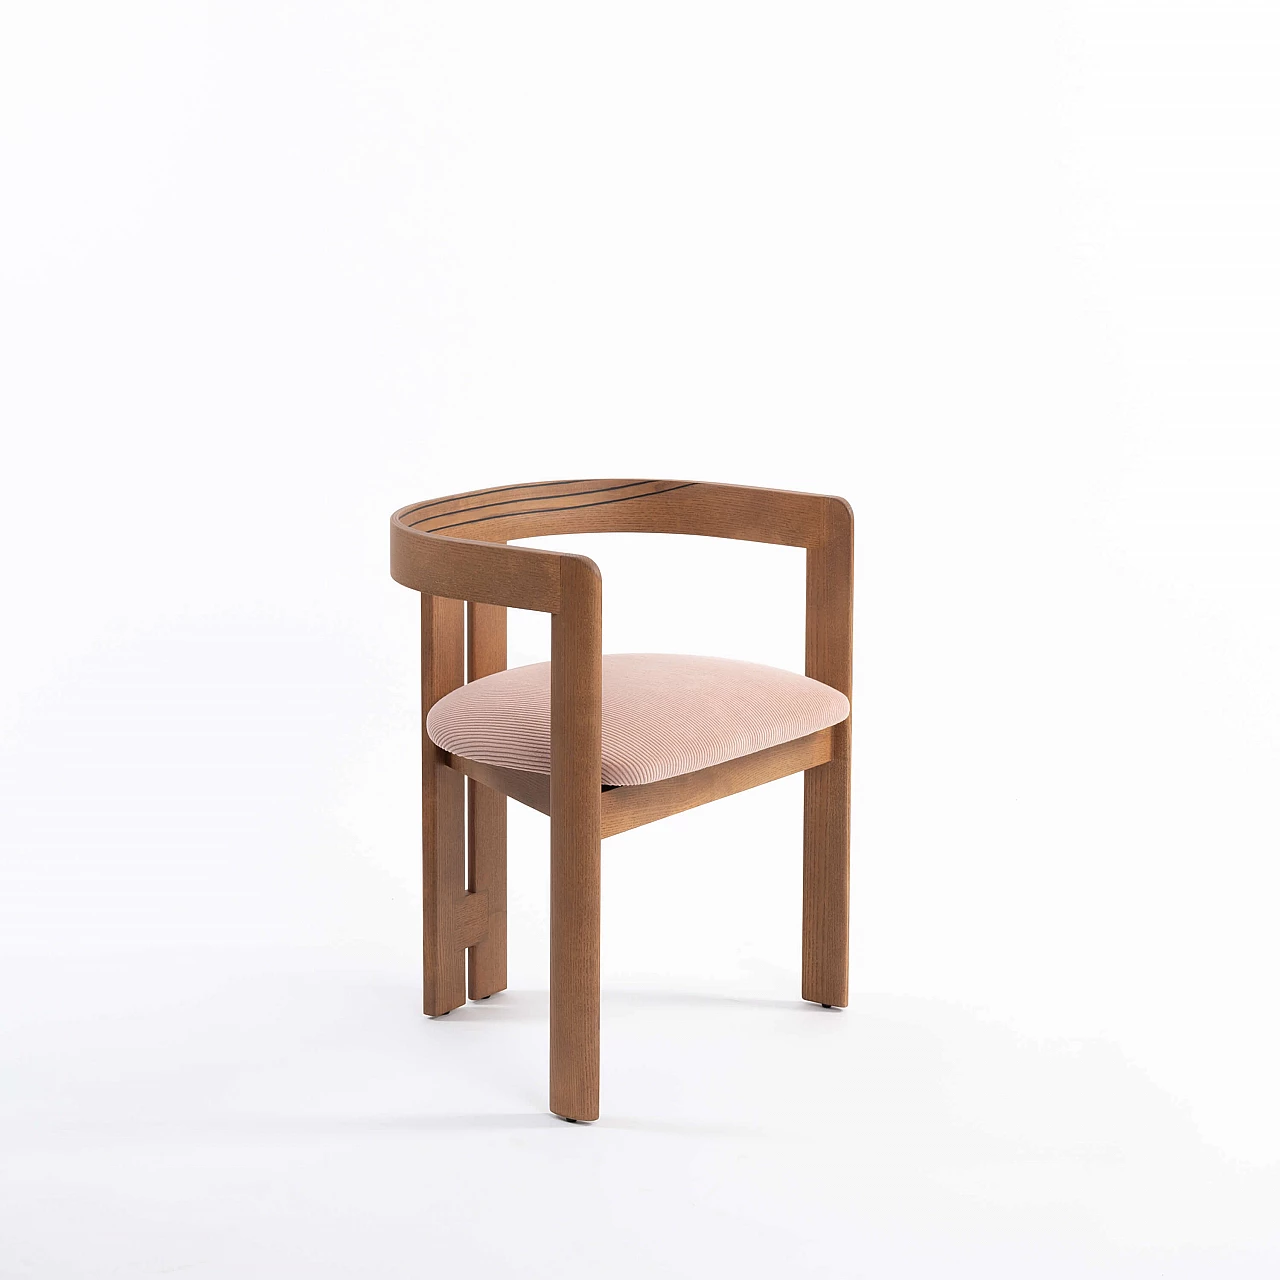 Pigreco chair by Tobia Scarpa for Tacchini 1